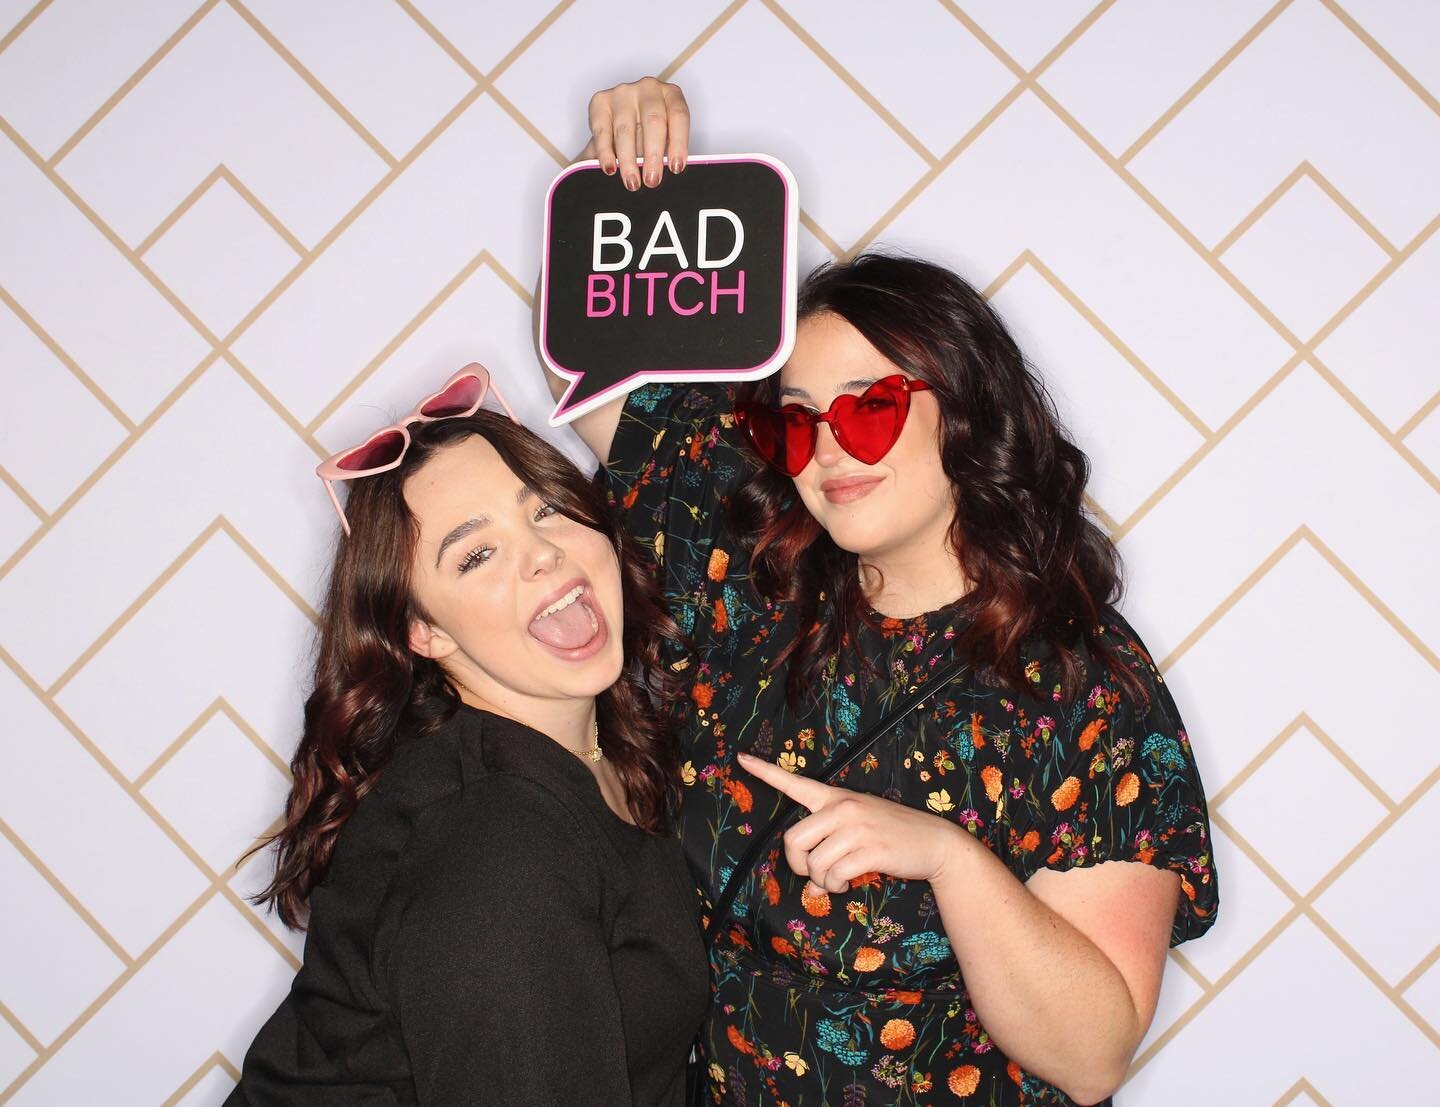 Is it even a party without a photo booth?! 💃🏼✨

&bull;
&bull;
&bull;

Let our photo booth serve as party favors, the ice-breaker, or just some extra fun when there&rsquo;s a gap in the schedule!

BACKDROP: GATSBY 
#photobooth #photoboothrental #ope